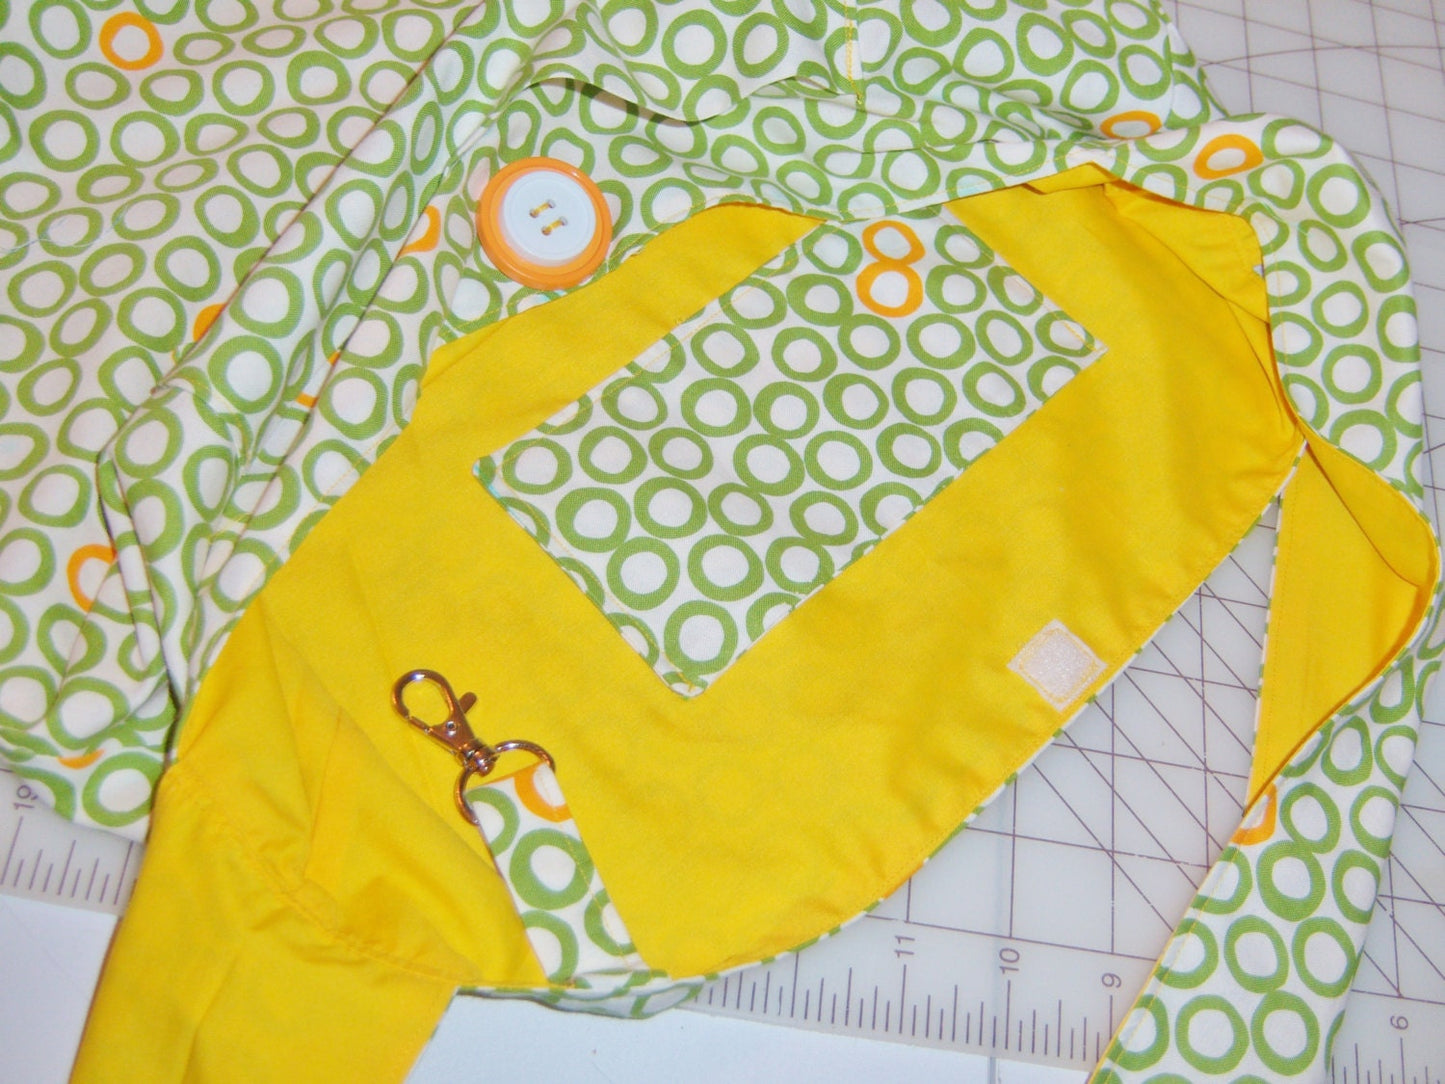 NEW Fast & Easy Hobo Bag Sewing Tutorial with Color Photos and Diagrams, Step by step, Make it Yourself